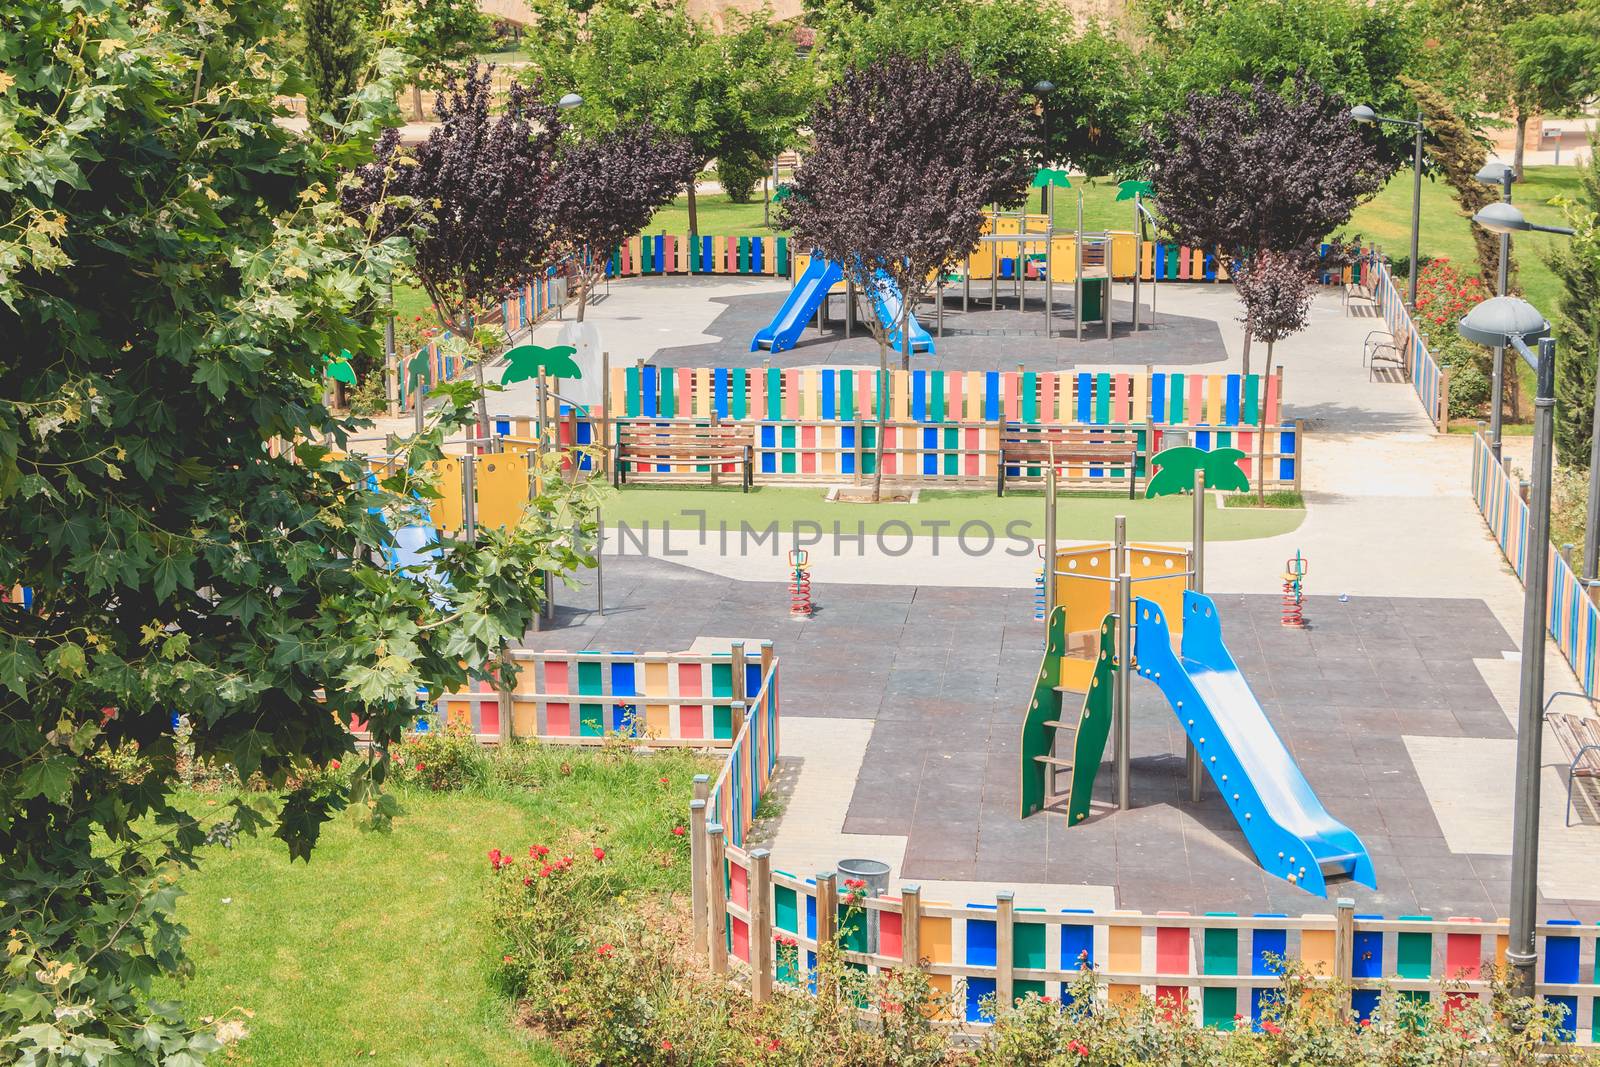 Valencia, Spain - June 16, 2017: view of a children's park with its games and slides in the city center on a summer day